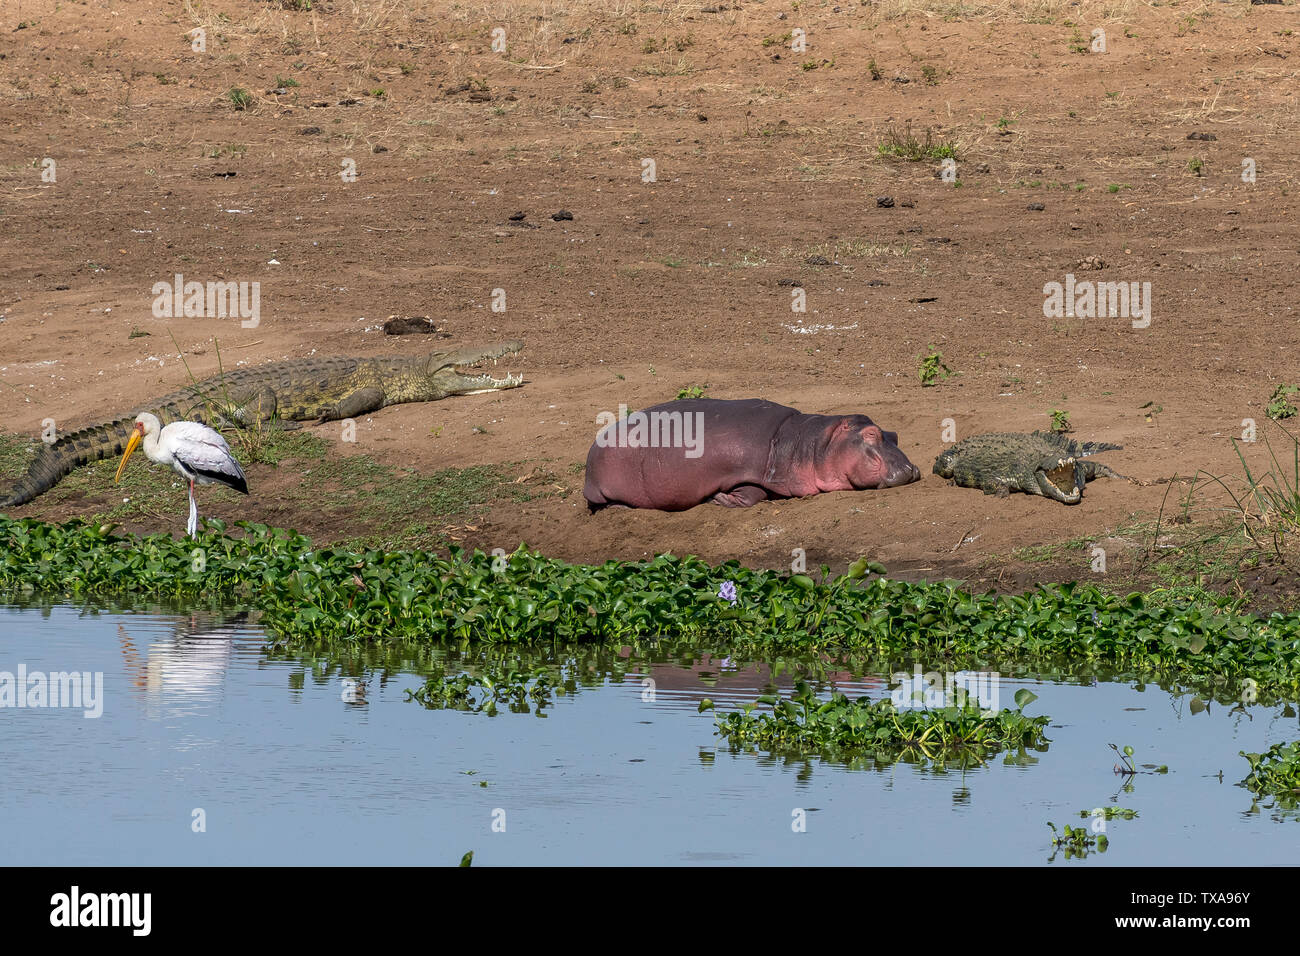 Nile crocodiles, a sleeping hippo and a yellow bill stork on the banks of a river. Water hyacint plants are visible Stock Photo